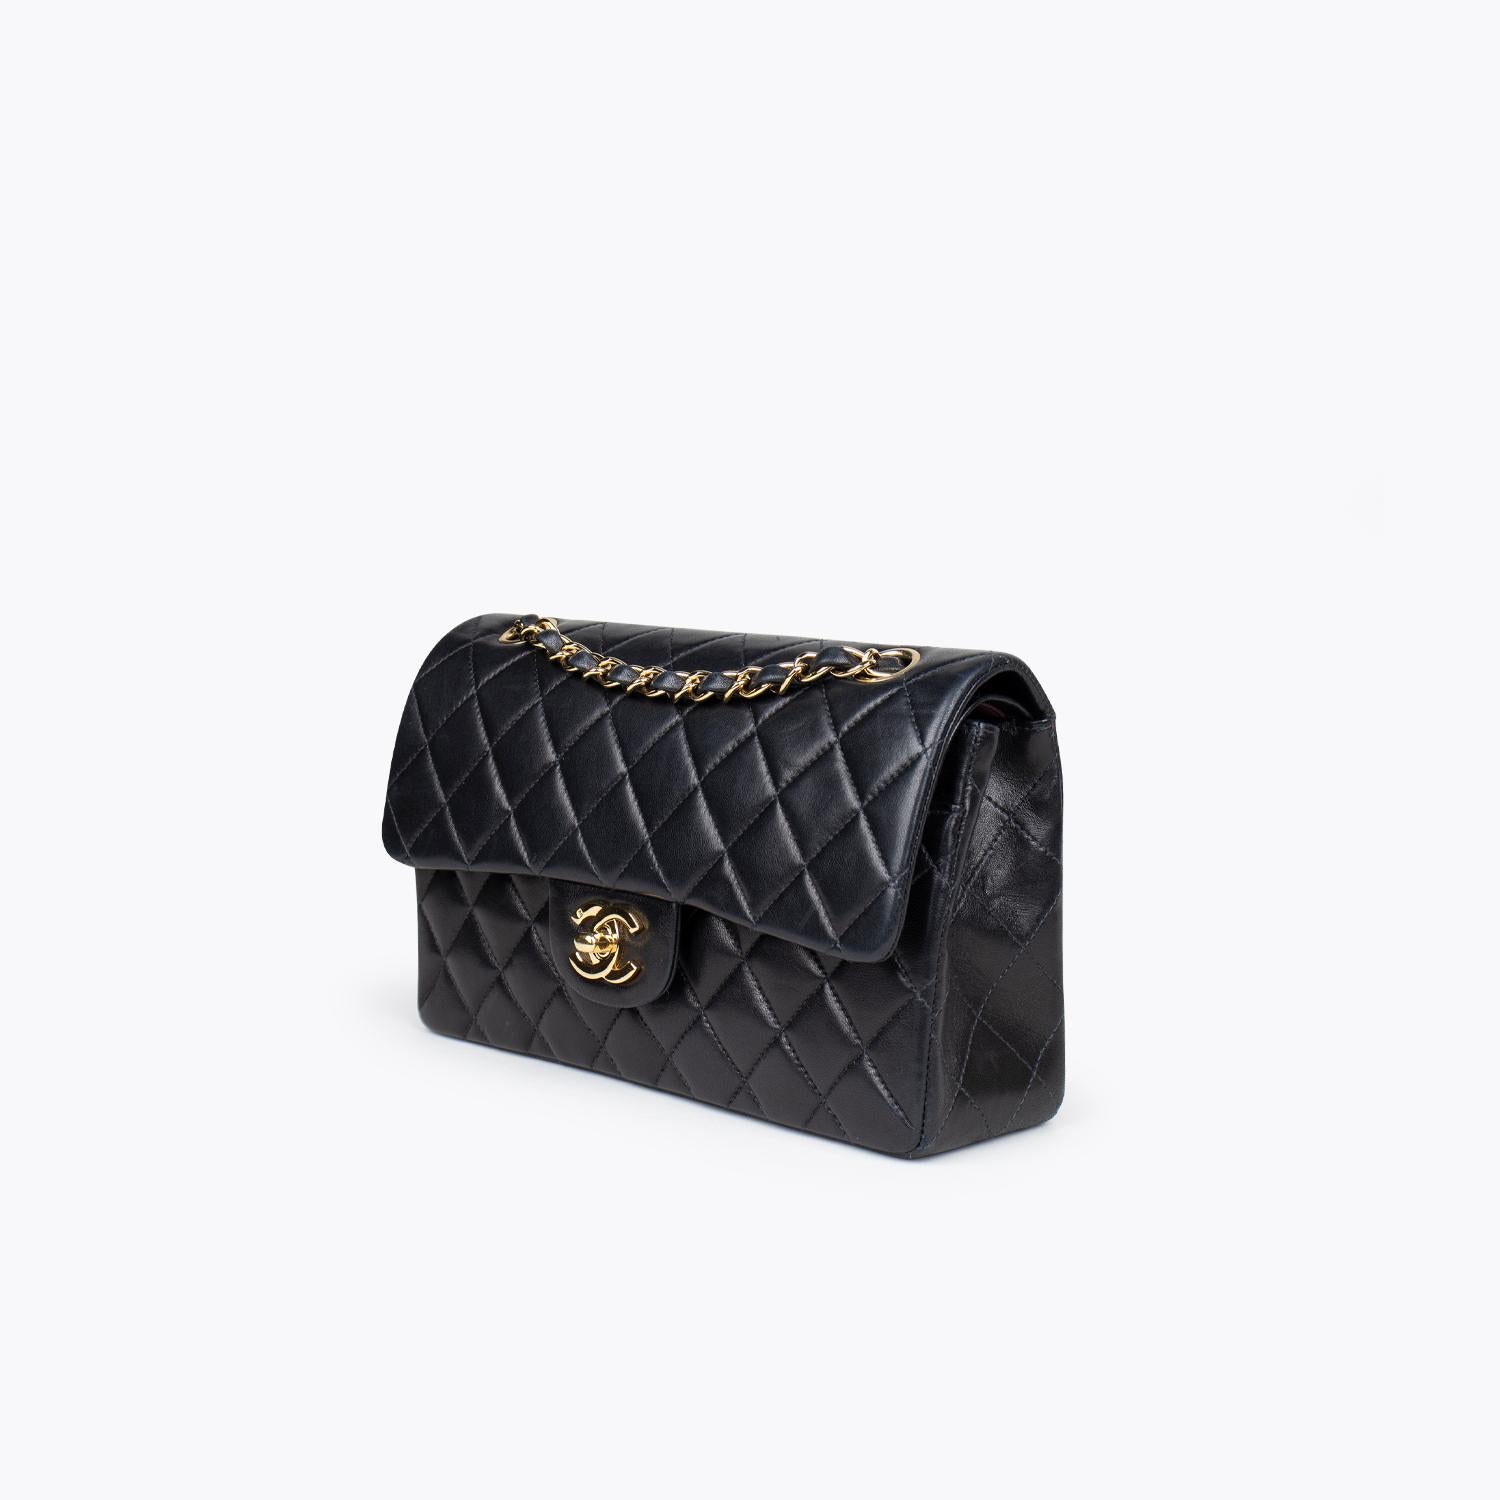 Black quilted lambskin Chanel Small Classic/Timeless Double Flap bag with

– Gold-tone hardware
– Convertible chain-link and leather shoulder strap
– Burgundy leather lining
– Single patch pocket at back
– Single zip pocket at flap underside, three